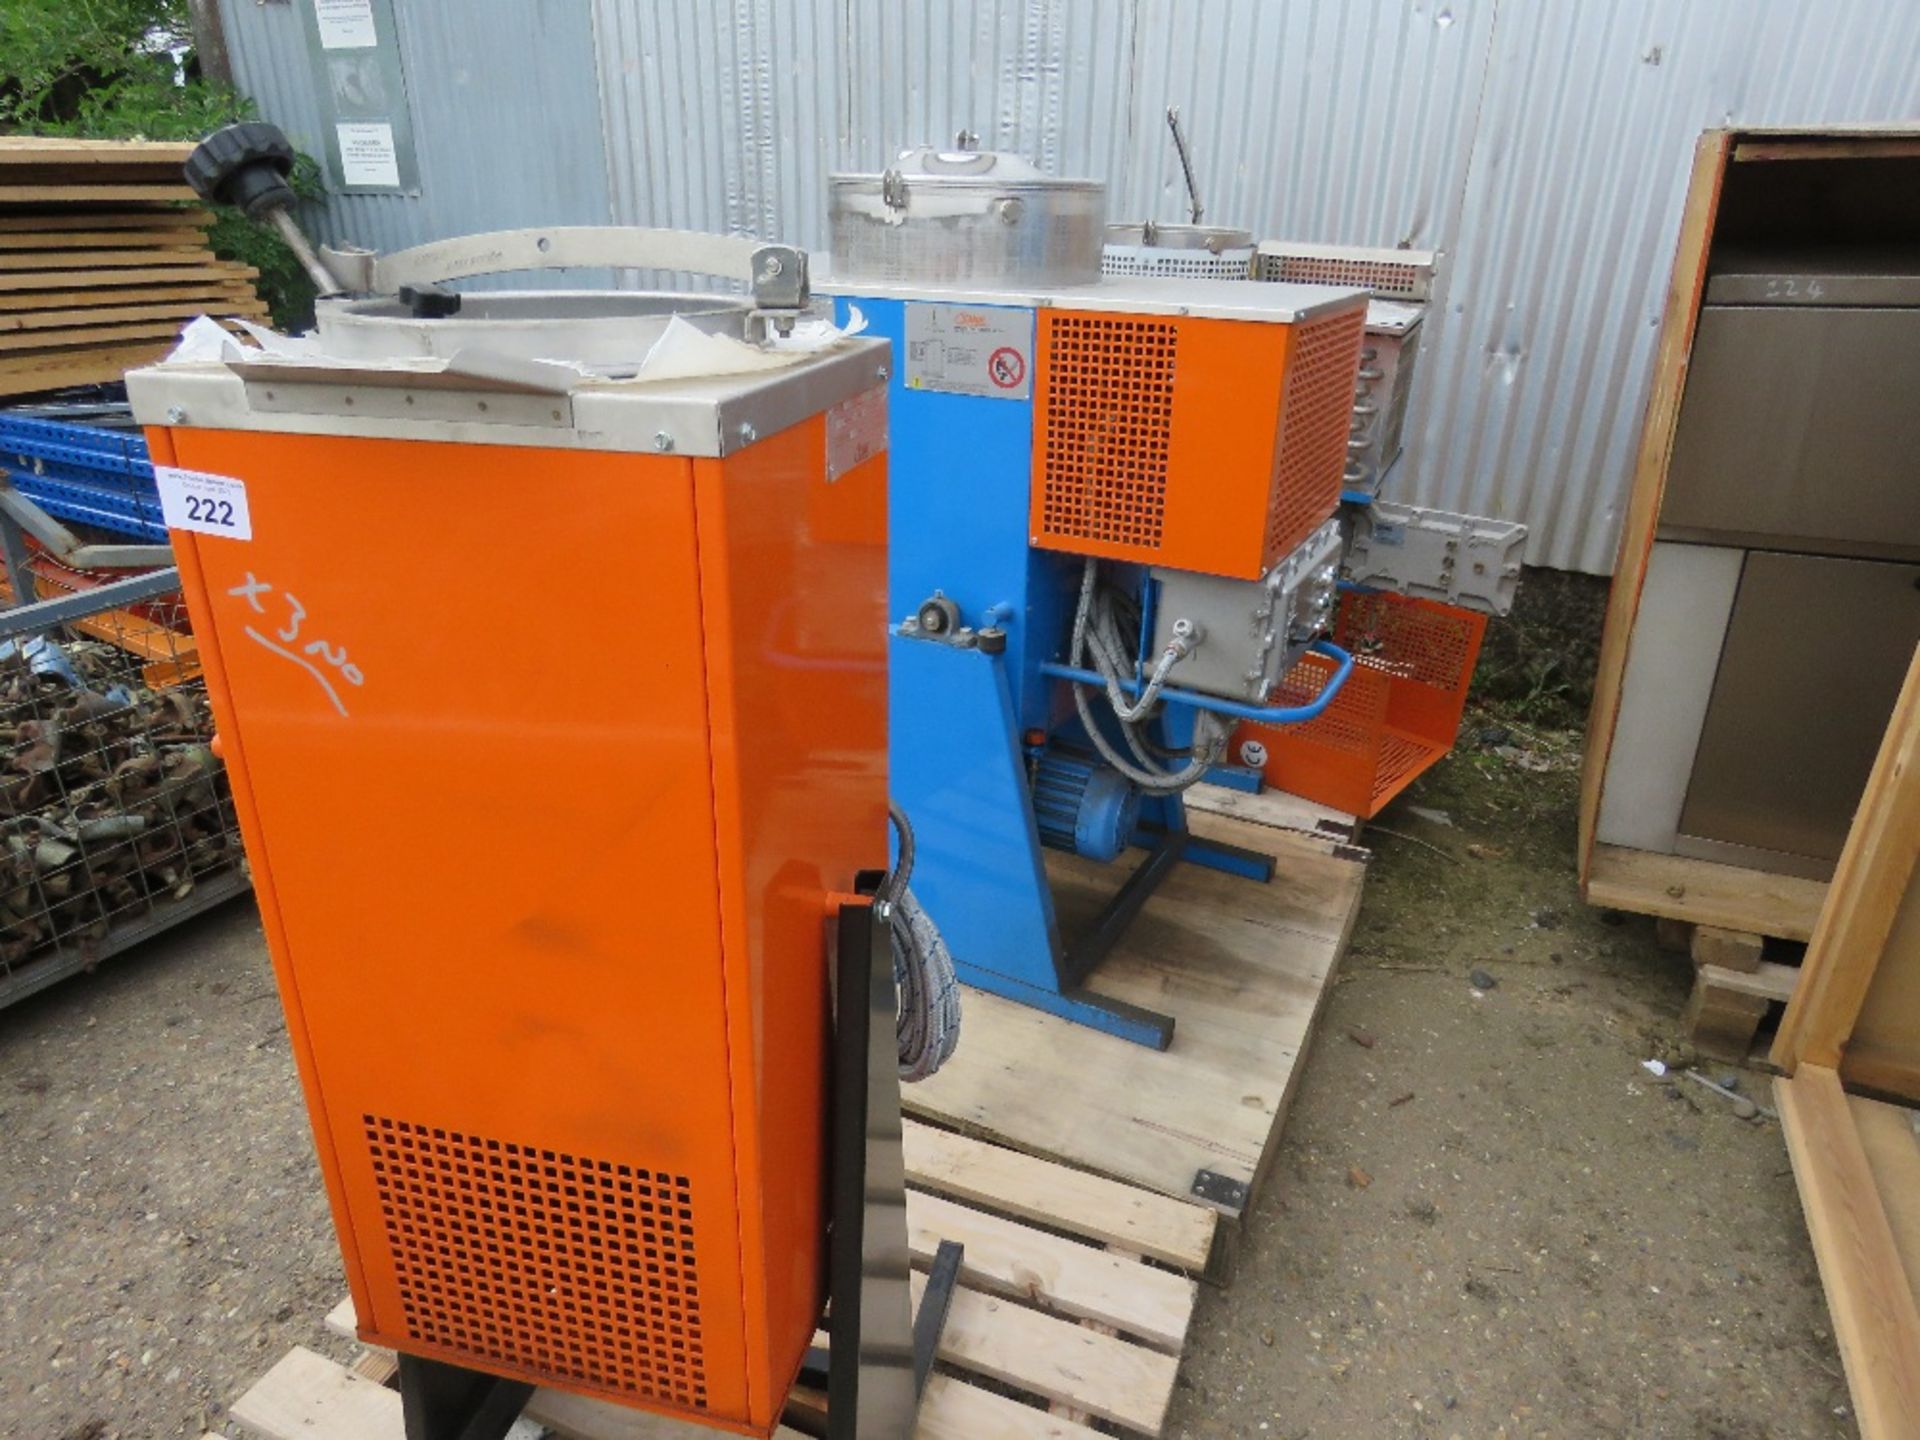 3 X CIEMME SOLVENT RECOVERY UNITS, 240VOLT POWERED. SOURCED FROM COMPANY LIQUIDATION. - Image 2 of 8